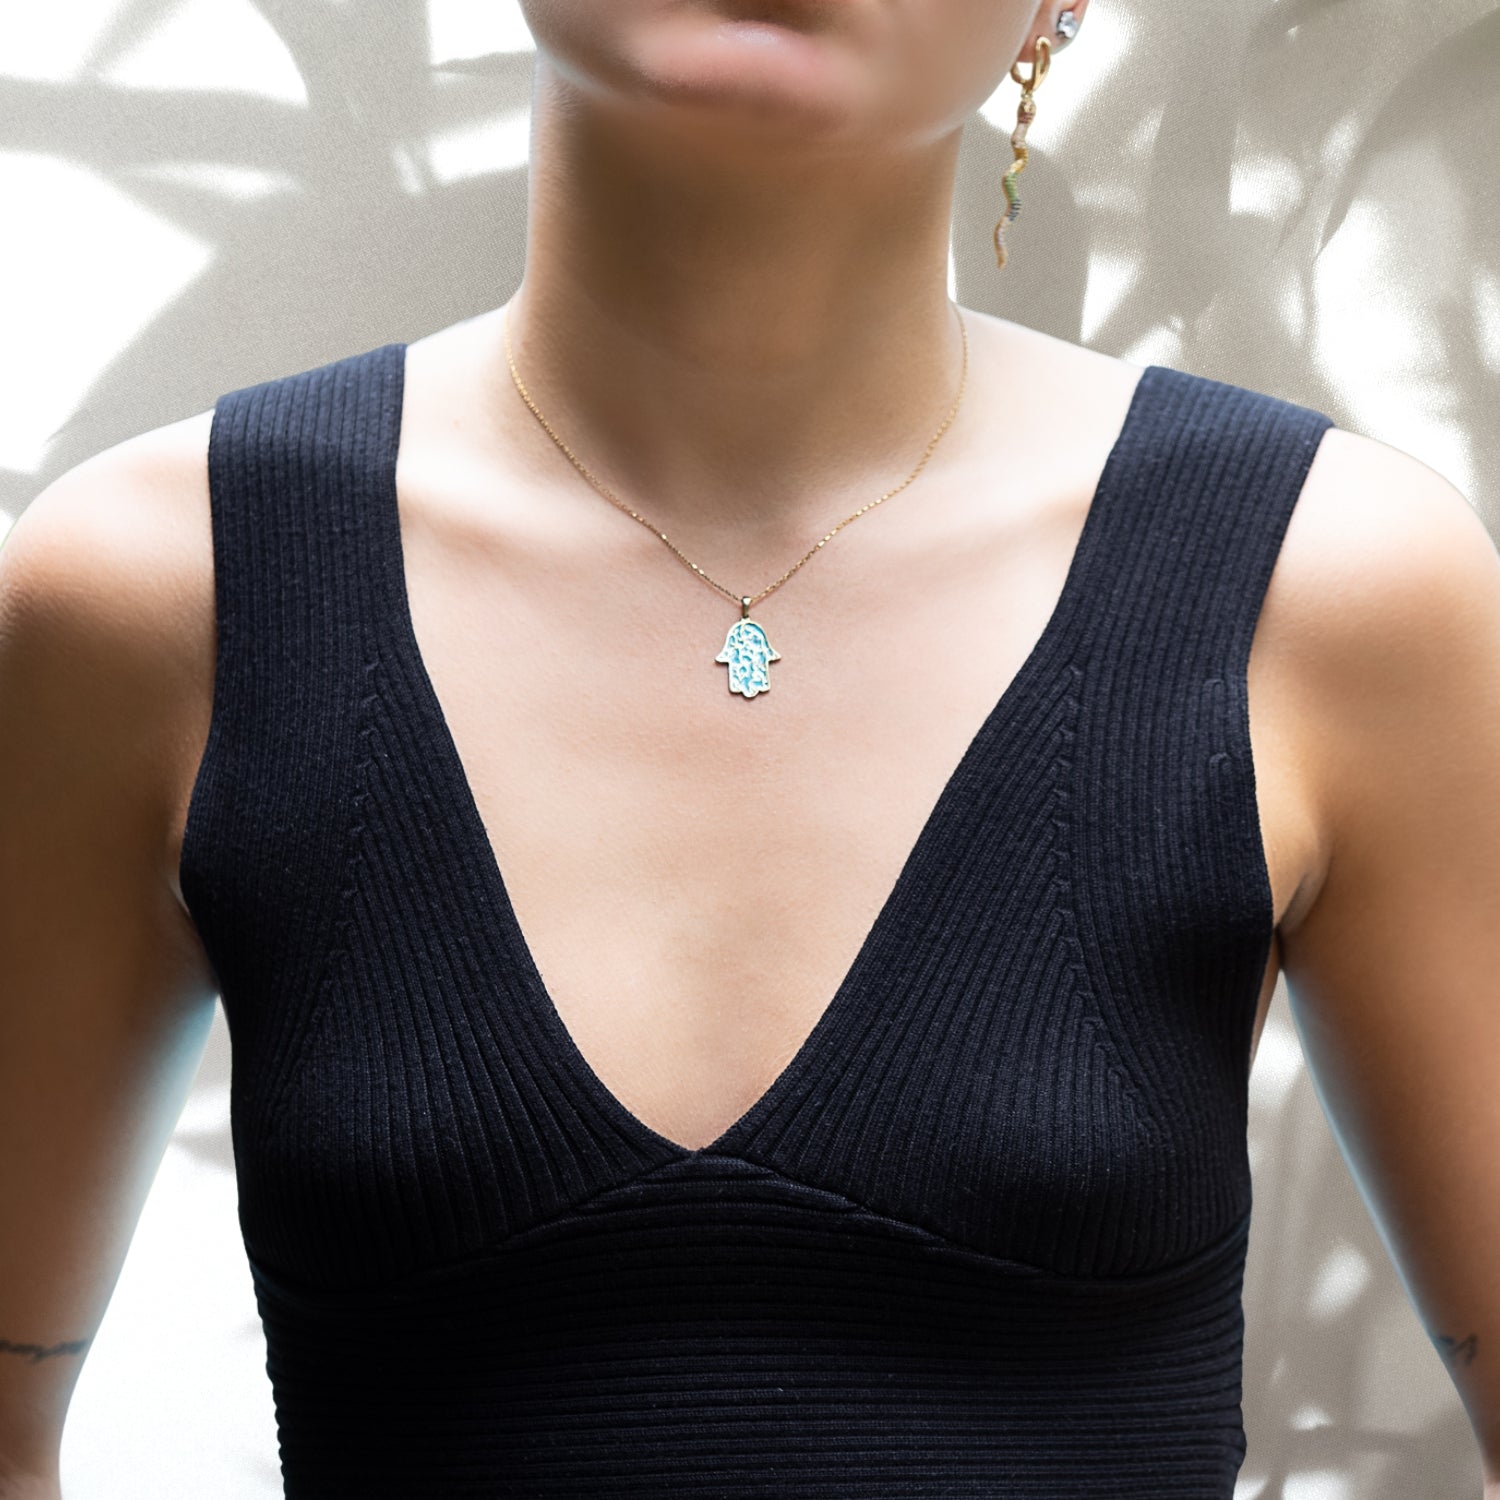 The model radiates positivity while wearing the vibrant Stay Positive Hamsa Necklace, showcasing its hamsa pendant with enamel accents, reminding us to stay positive in all situations.